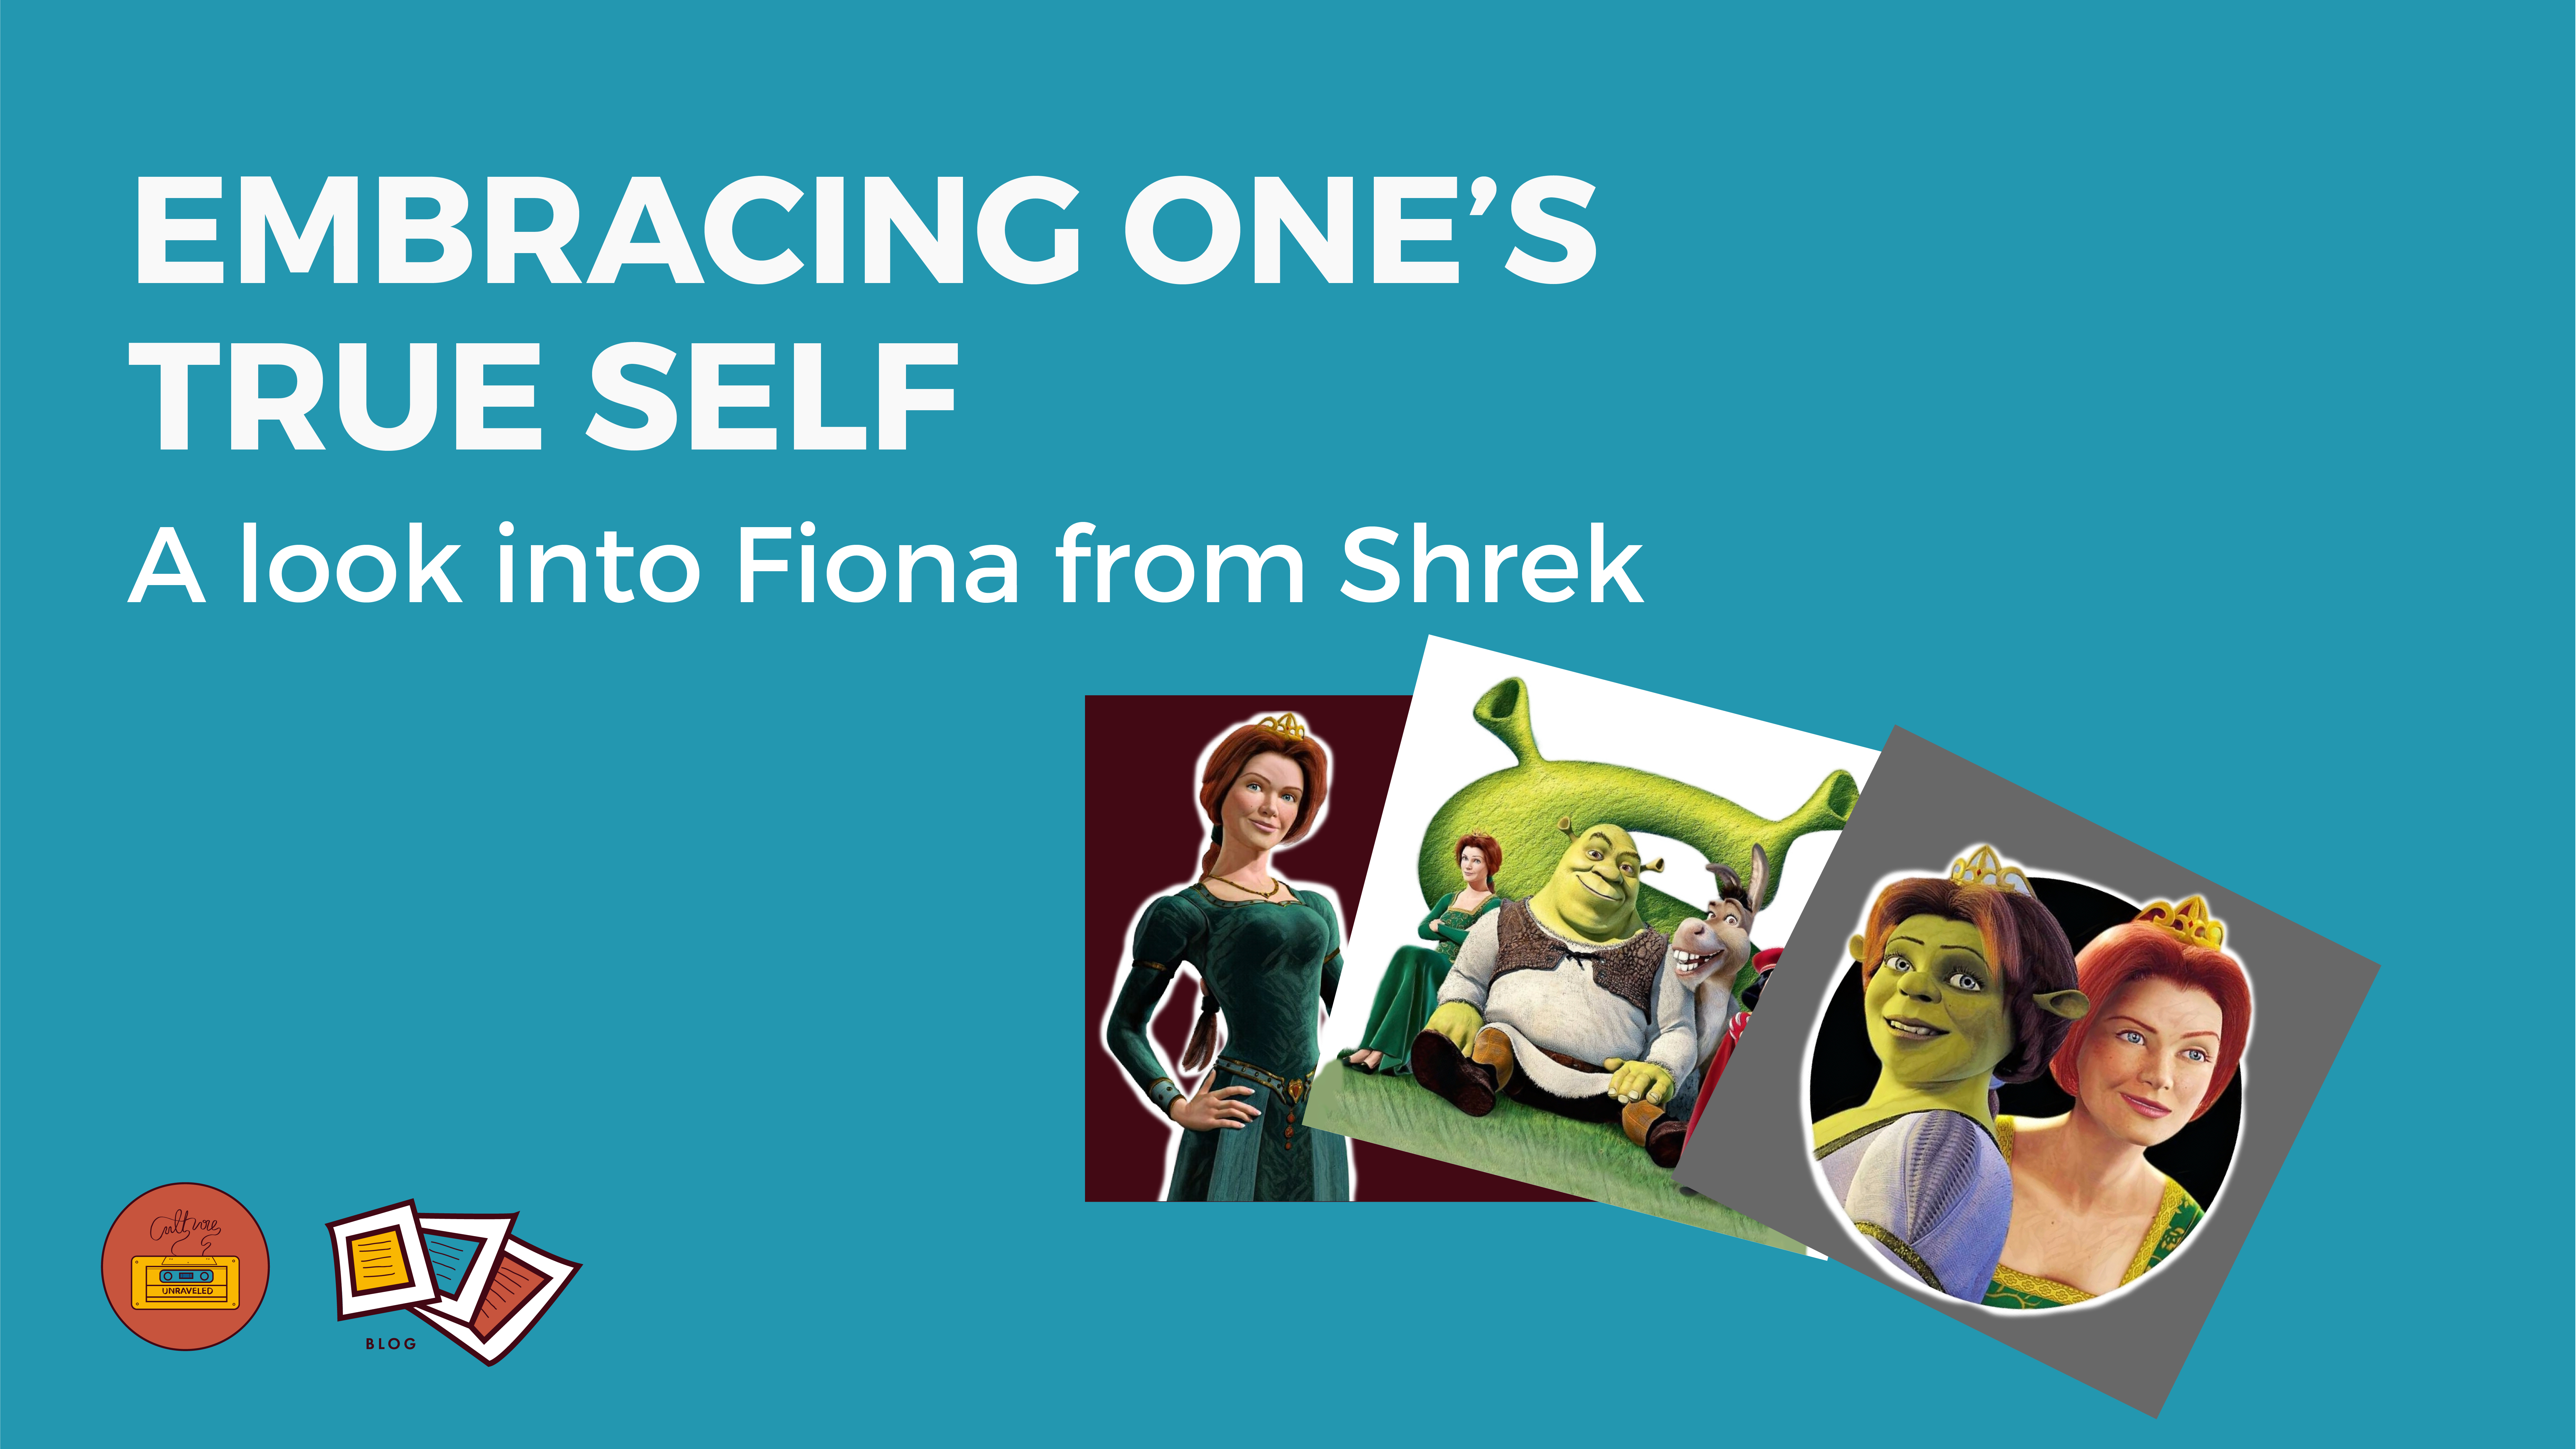 Embracing One’s True Self. A Look into Fiona from Shrek